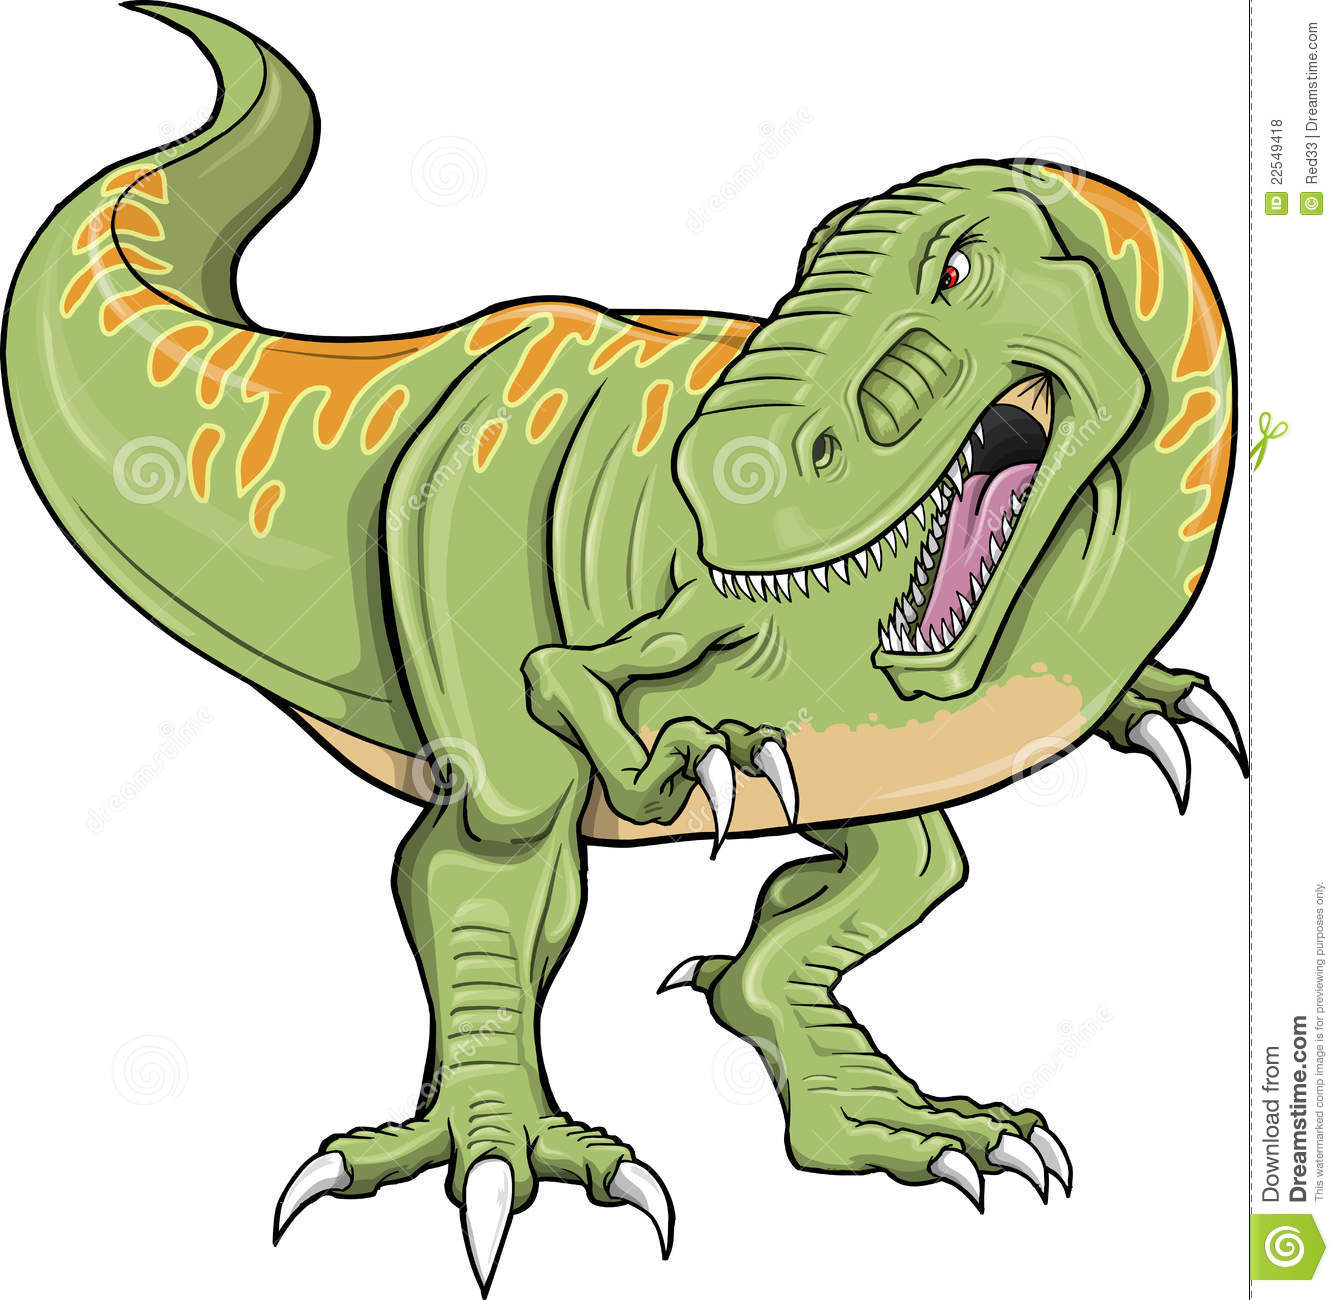 Tyrannosaurus rex clipart 20 free Cliparts | Download images on